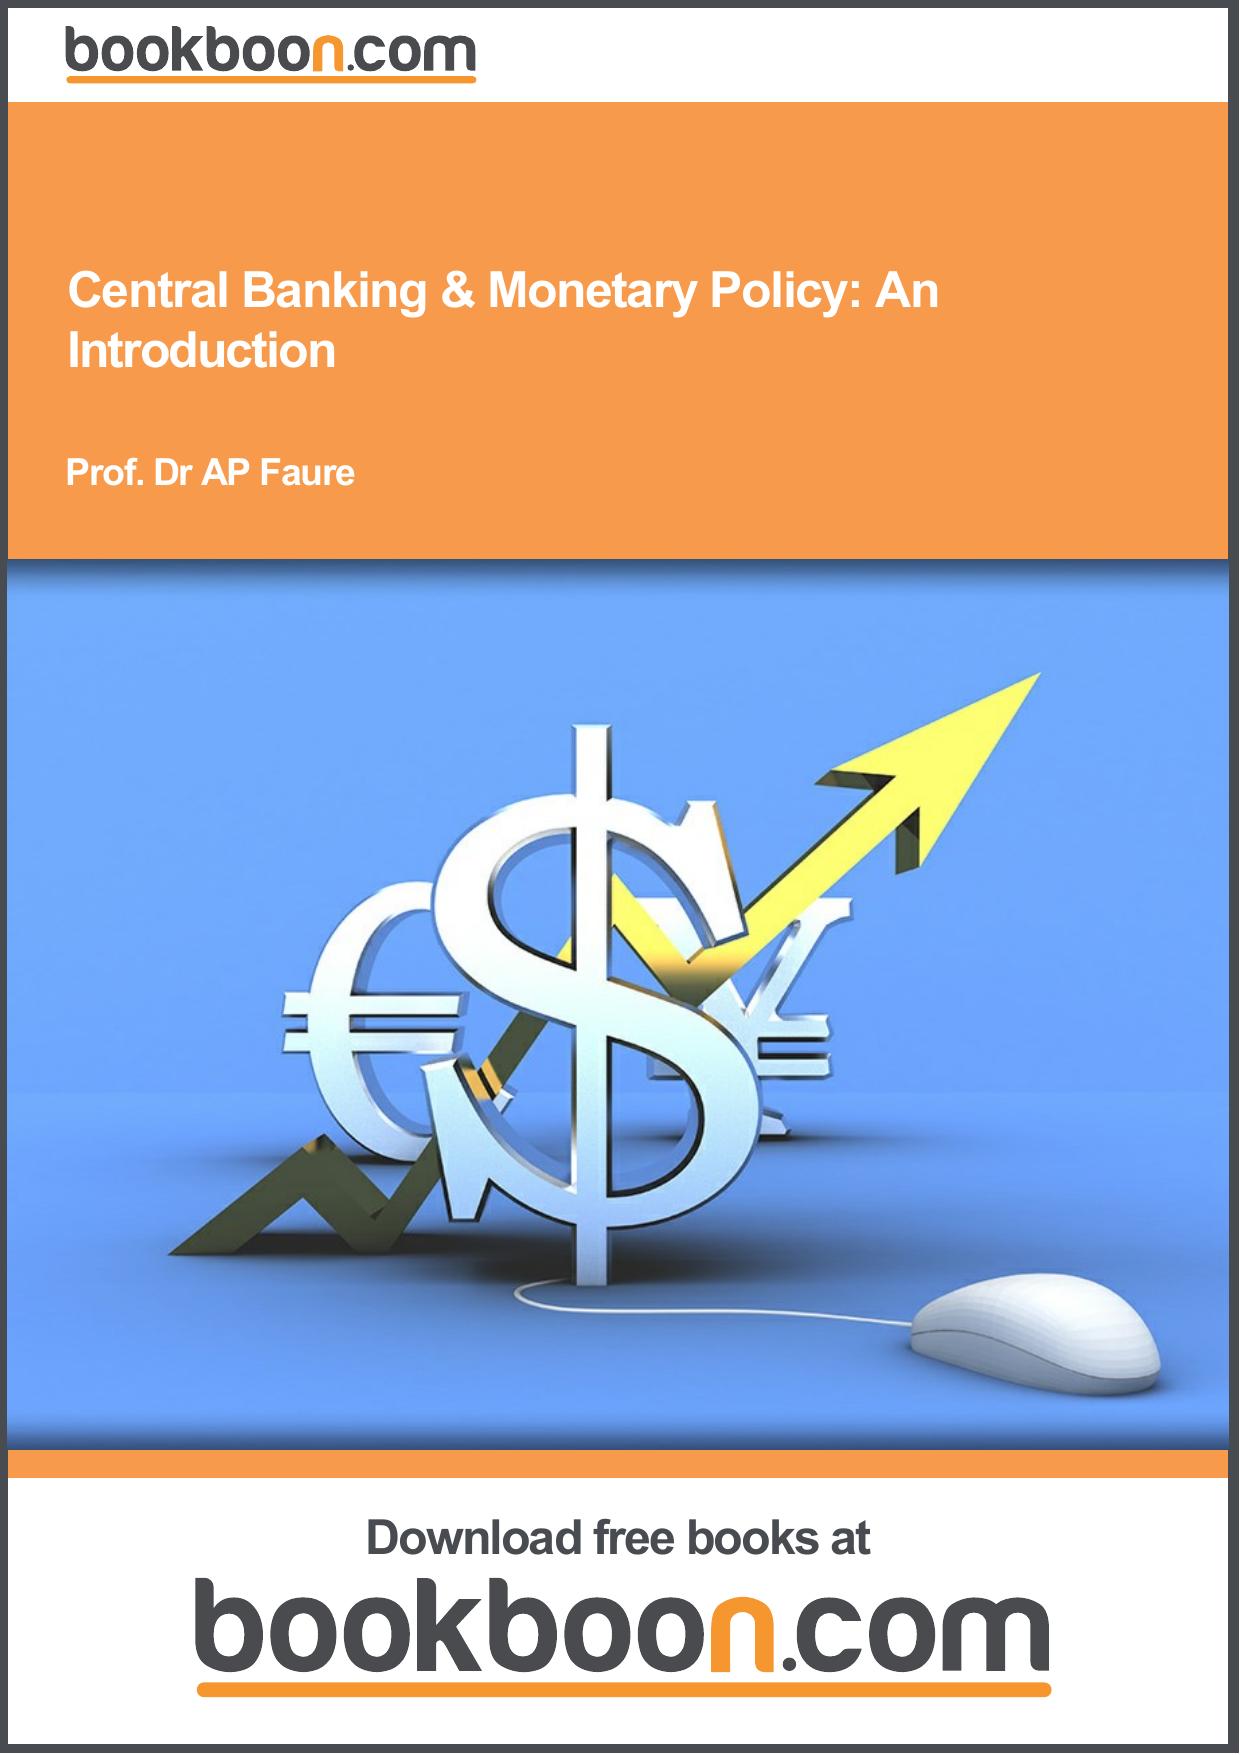 Central Banking & Monetary Policy: An Introduction